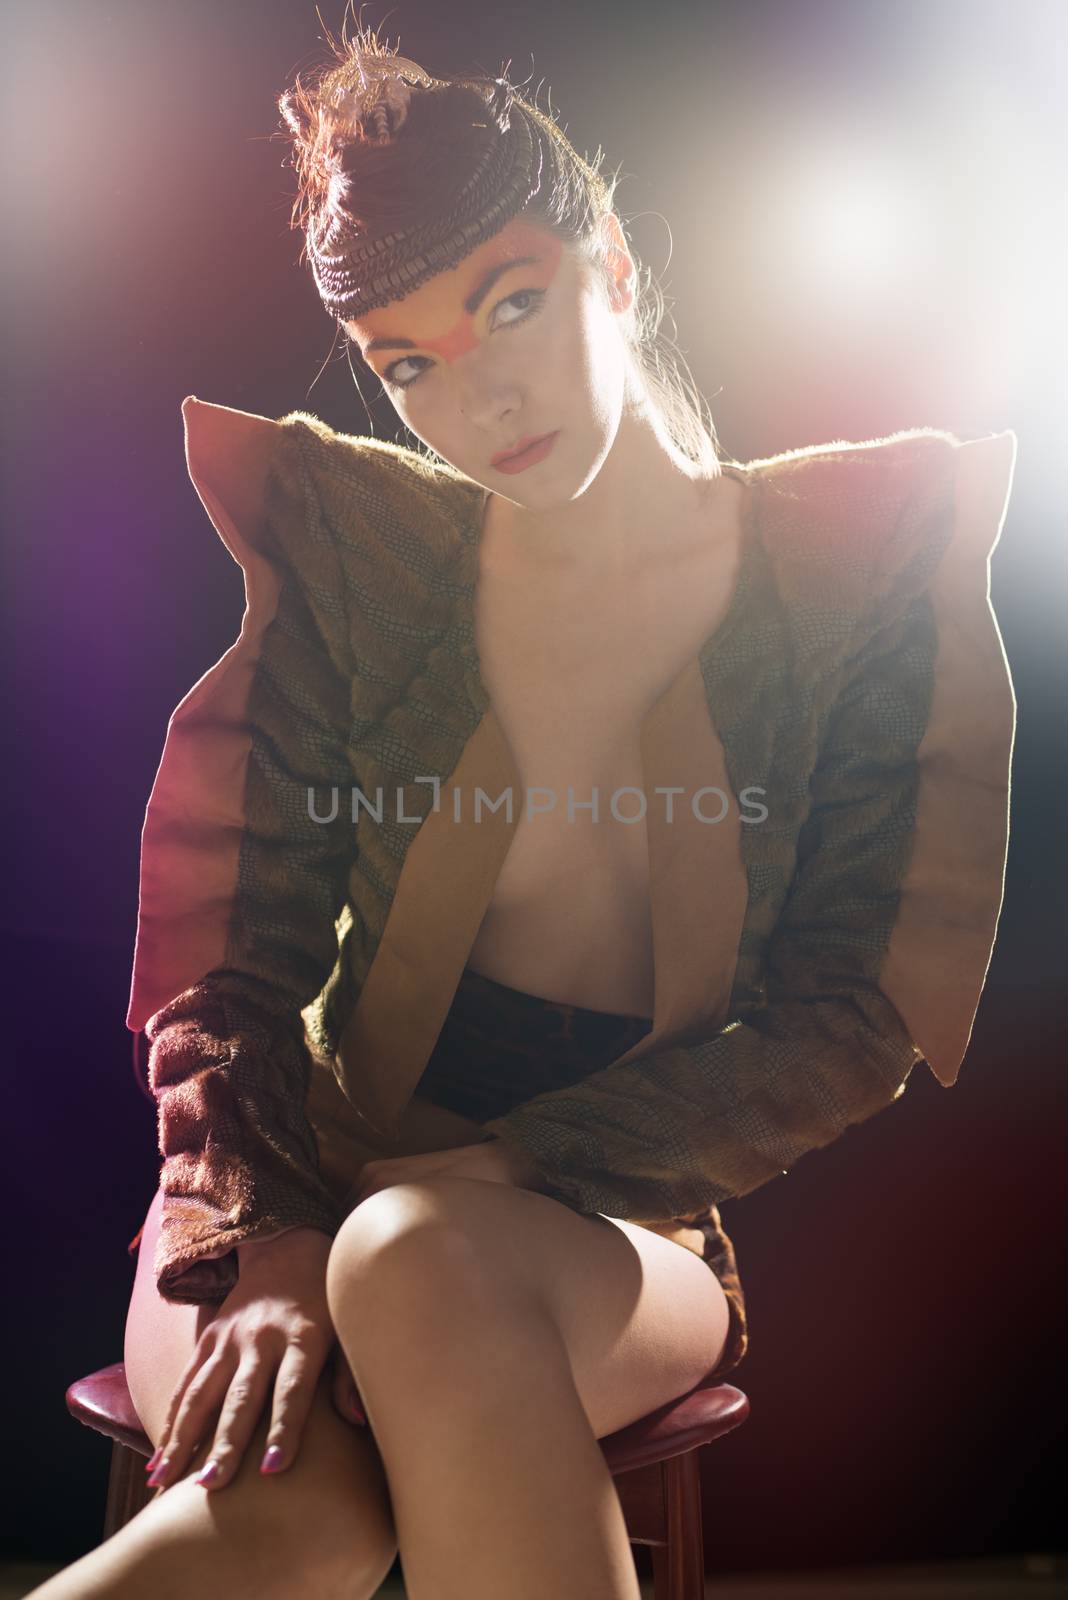 Portrait of fashion woman on a dark background illuminated by colored lights.